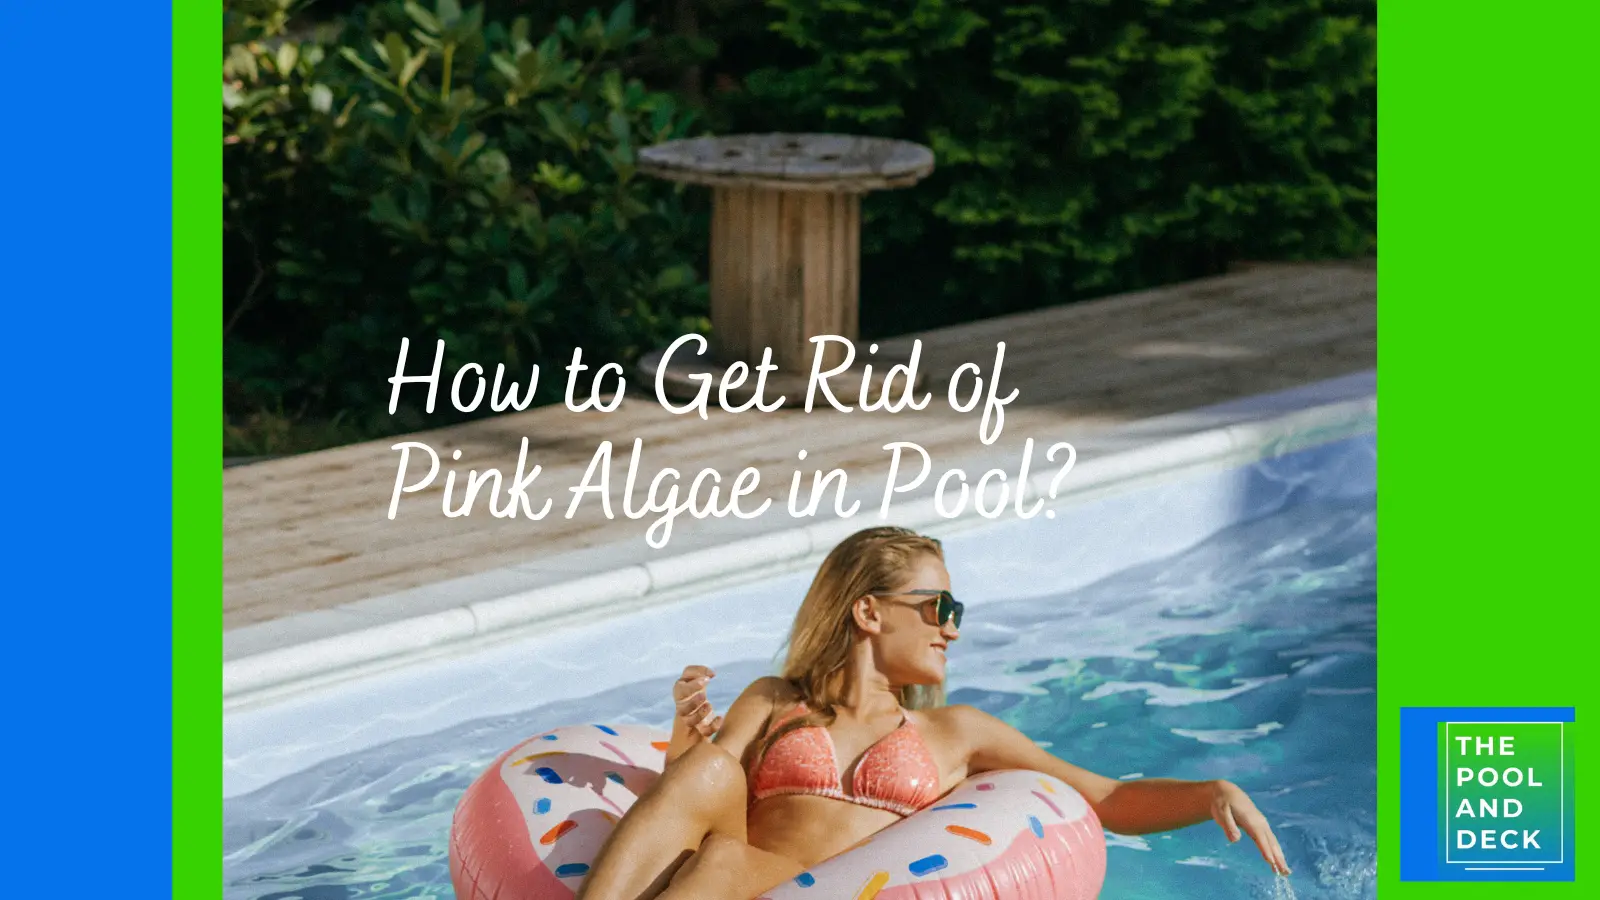 How to Get Rid of Pink Algae in Pool? (9 Step Effective Process)